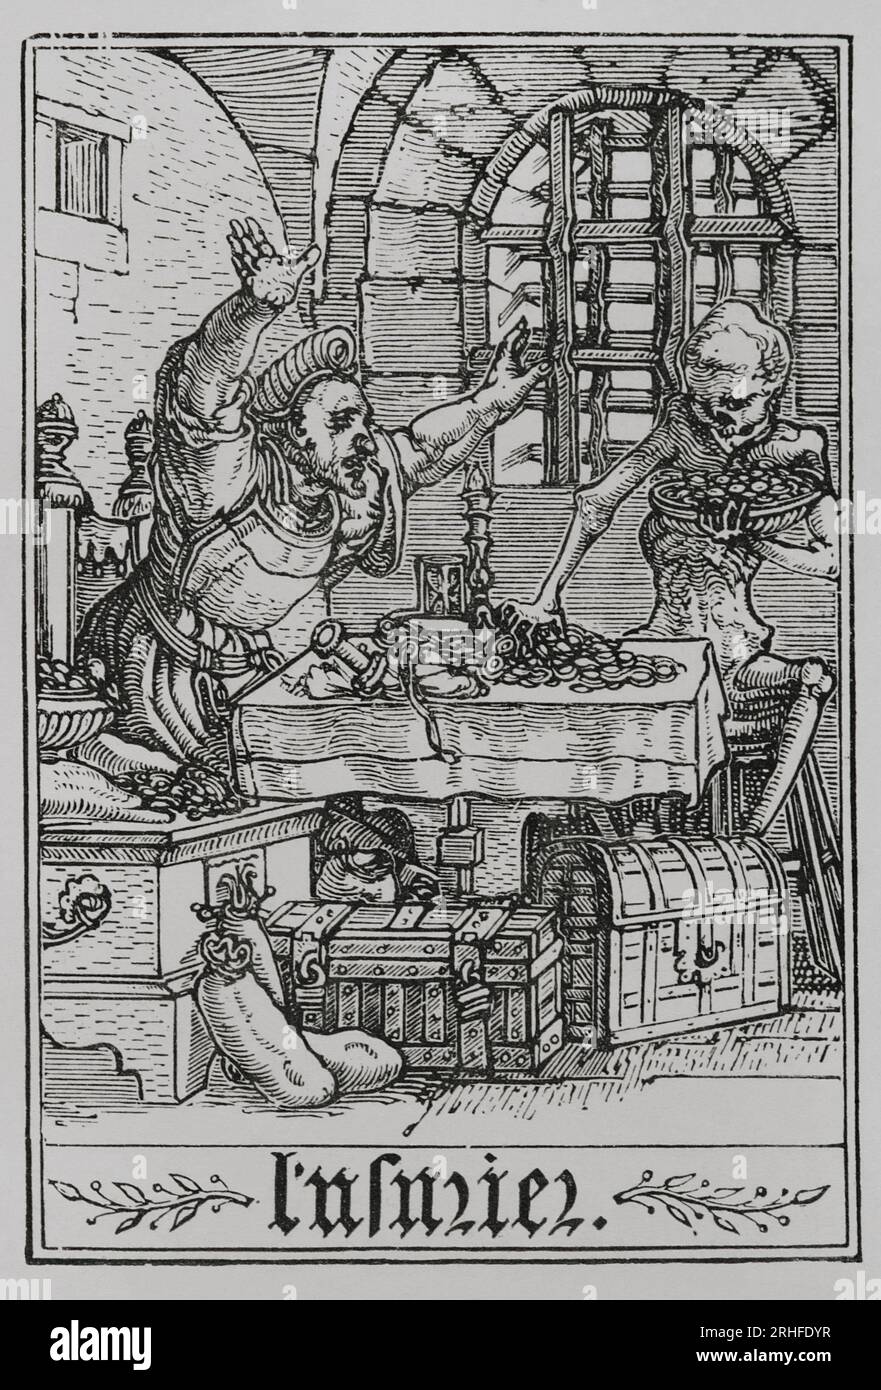 The Miser. Depiction of a rich man who has locked himself in a room with barred windows. Coins, chests and bags of money all around him. A skeleton is trying to take coins from the table, being rebuked by the man who does not seem to be afraid of it. Facsimile of an engraving belonging to the series 'The Dance of Death' by Hans Holbein the Younger, in 'Les Simulachres et Histoires facées de la Mort', 1538. 'Vie Militaire et Religieuse au Moyen Age et à l'Epoque de la Renaissance'. Paris, 1877. Stock Photo